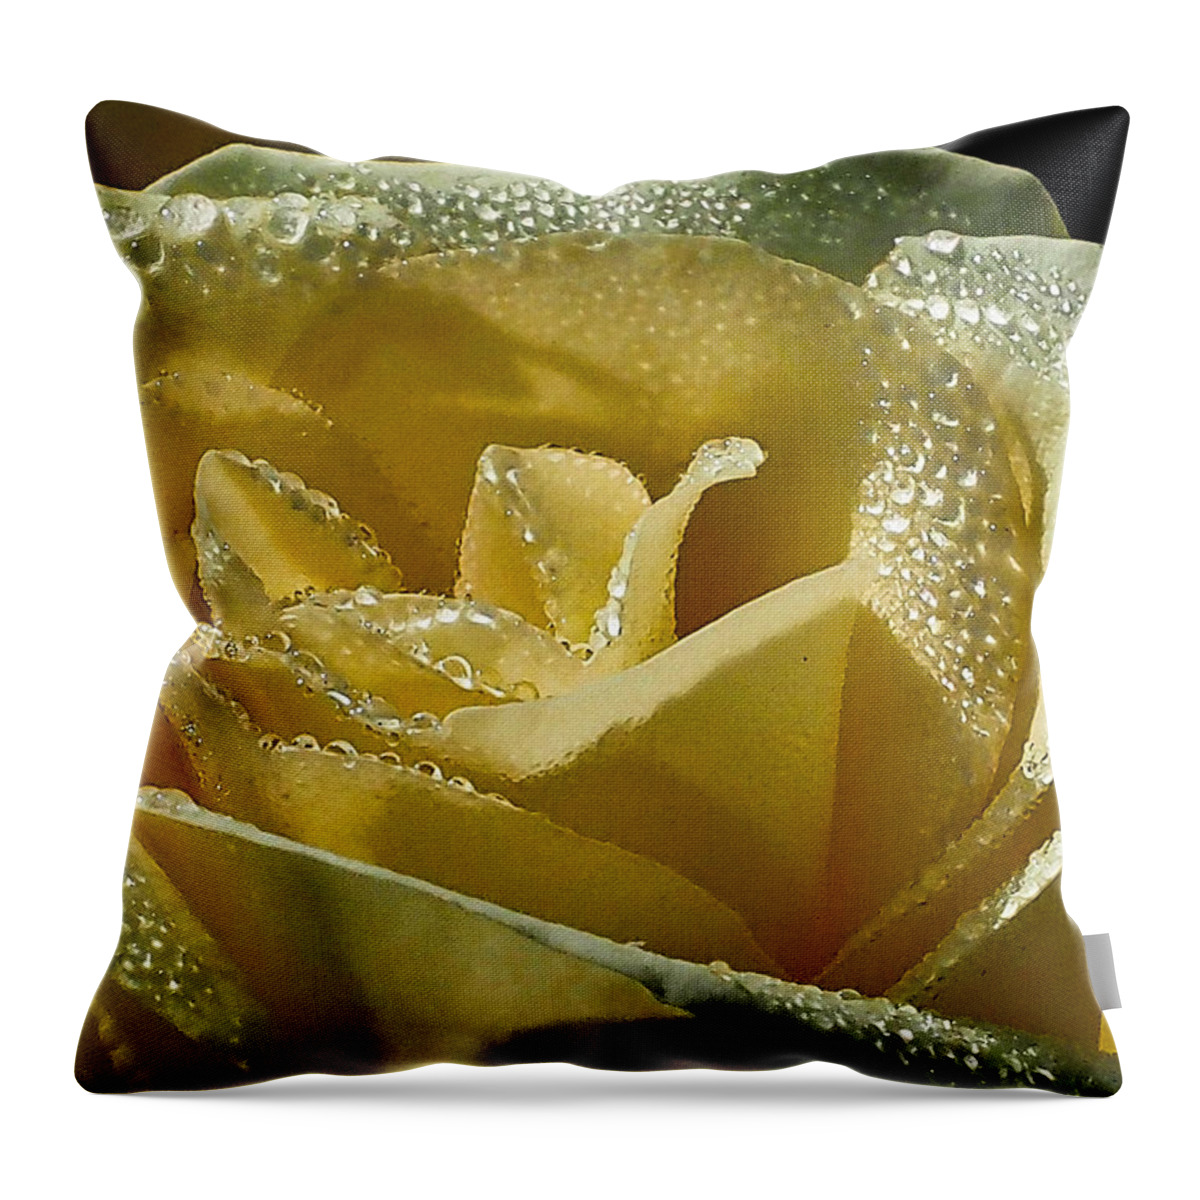 Rose Throw Pillow featuring the photograph Early Morning Dew by Jerry Connally